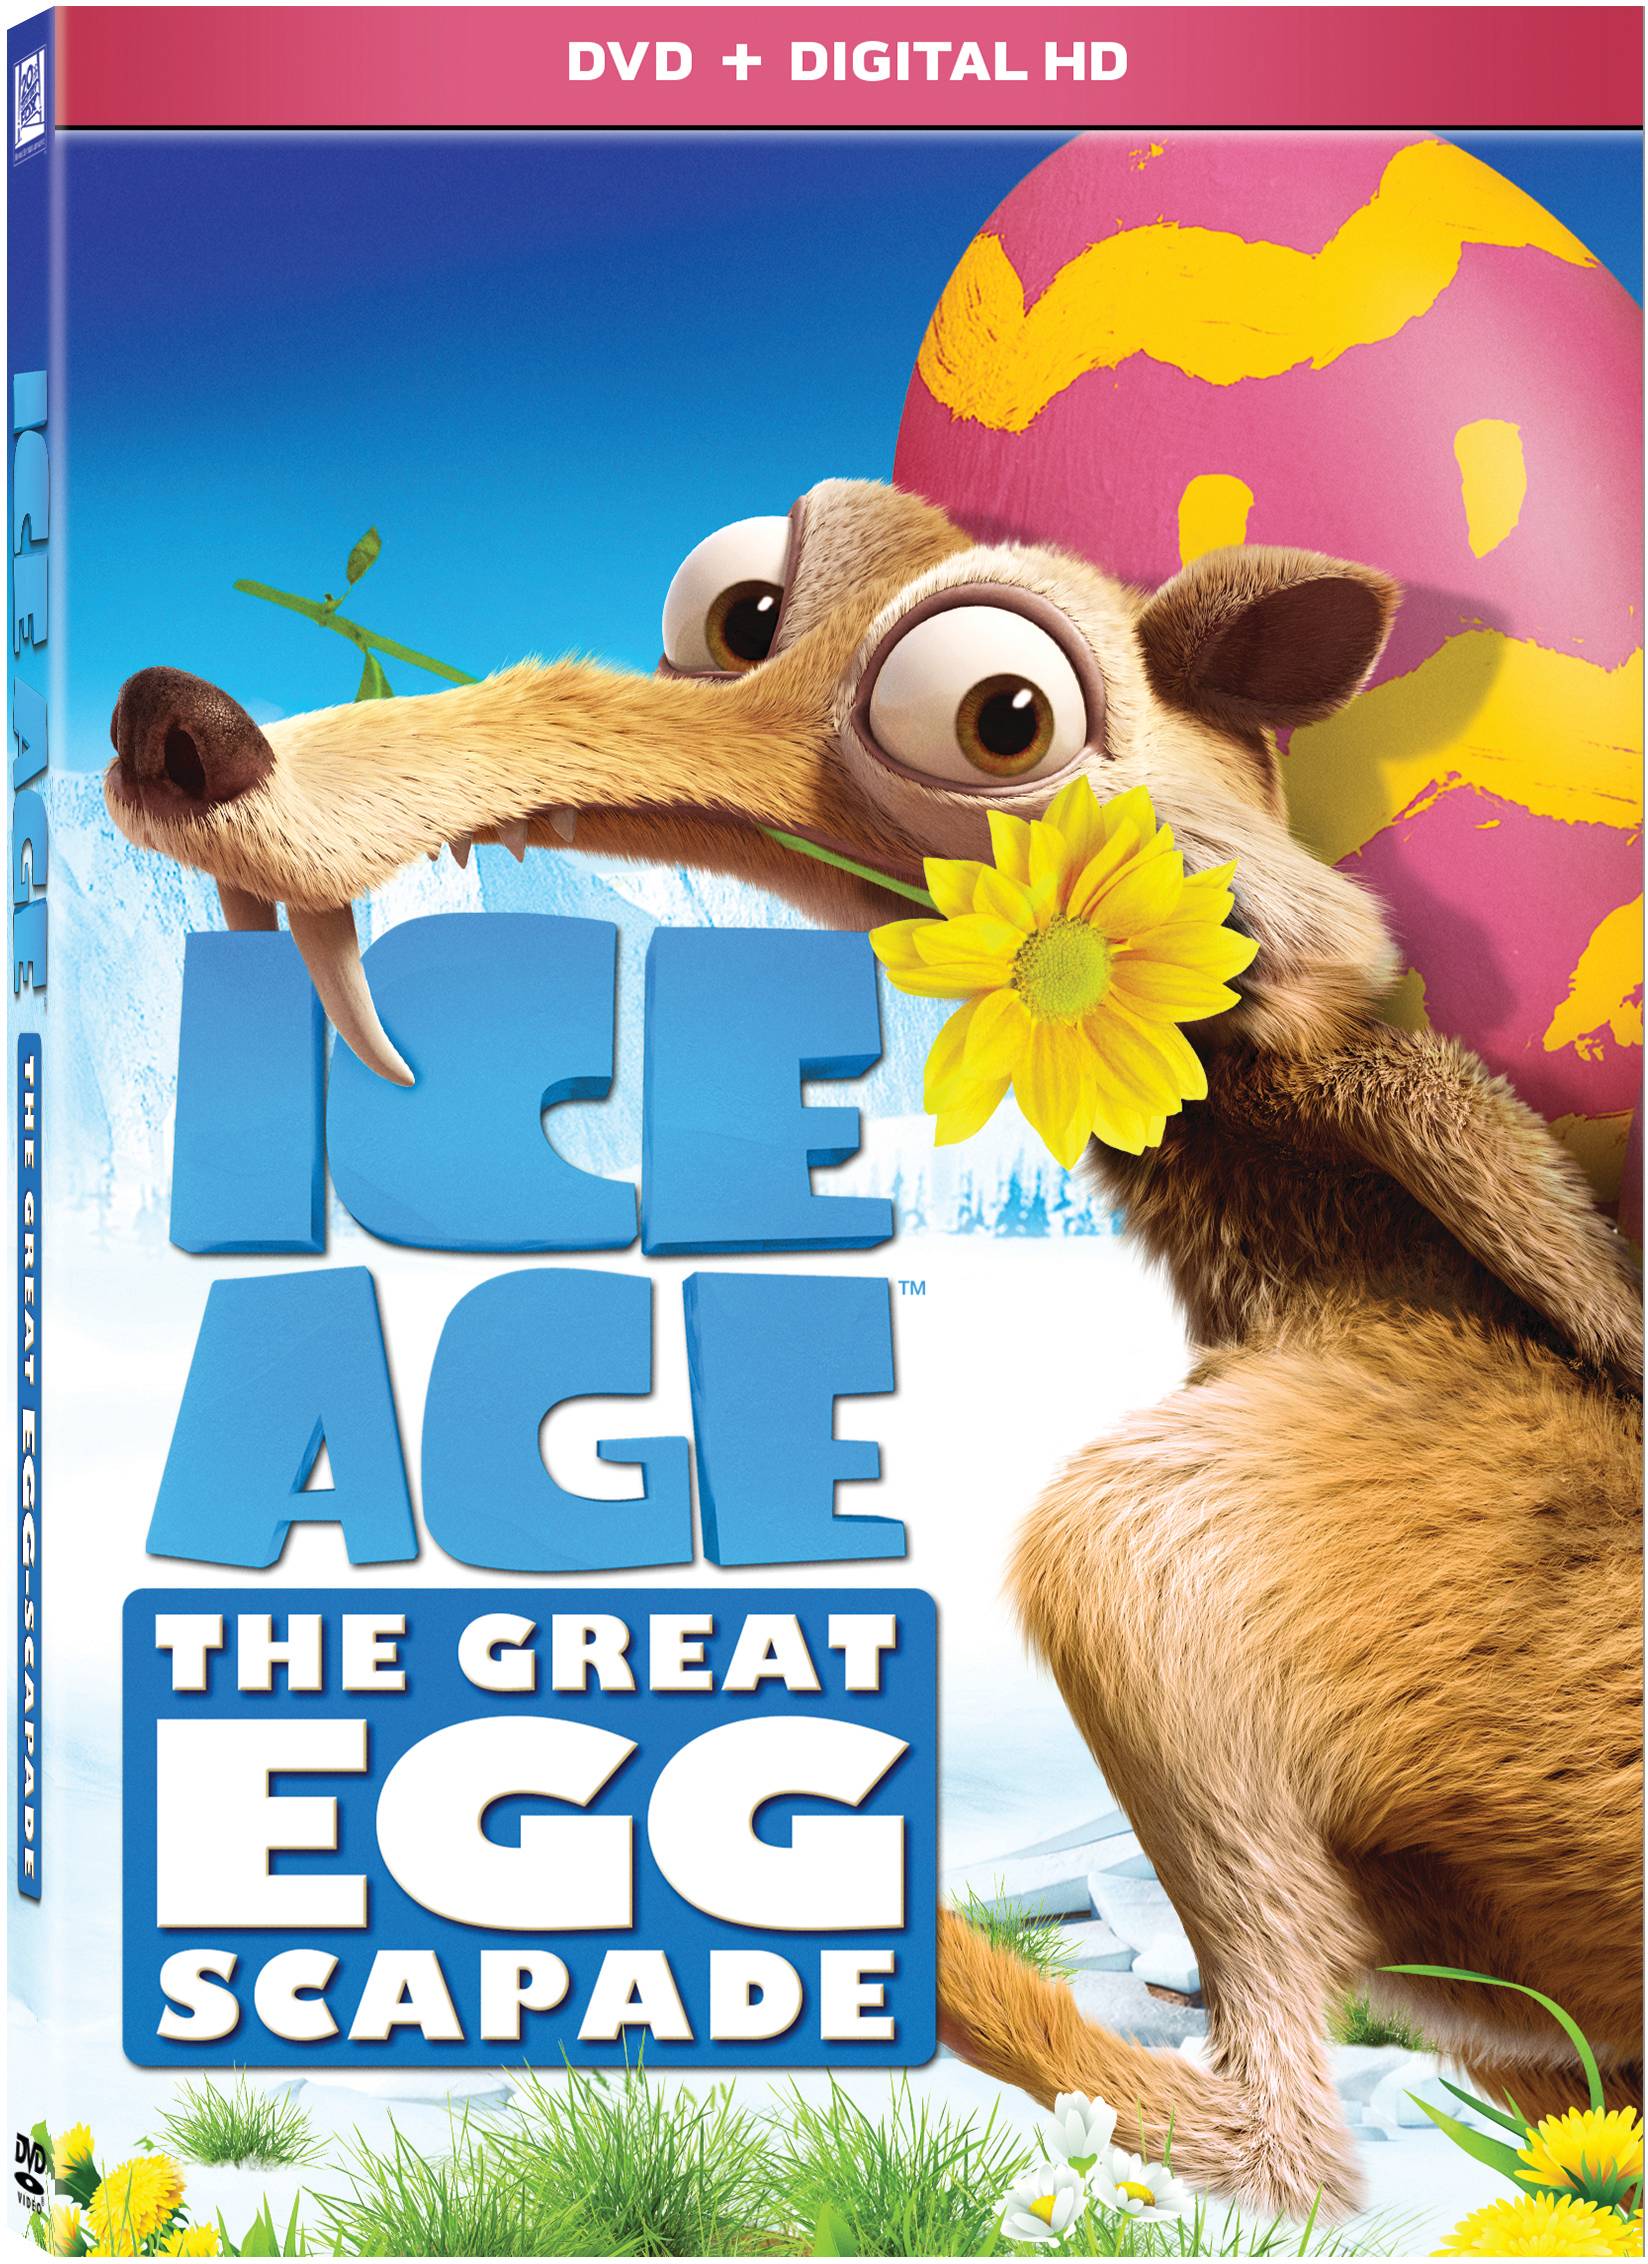 Ice Age: The Great Egg-Scapade (DVD) - image 2 of 2